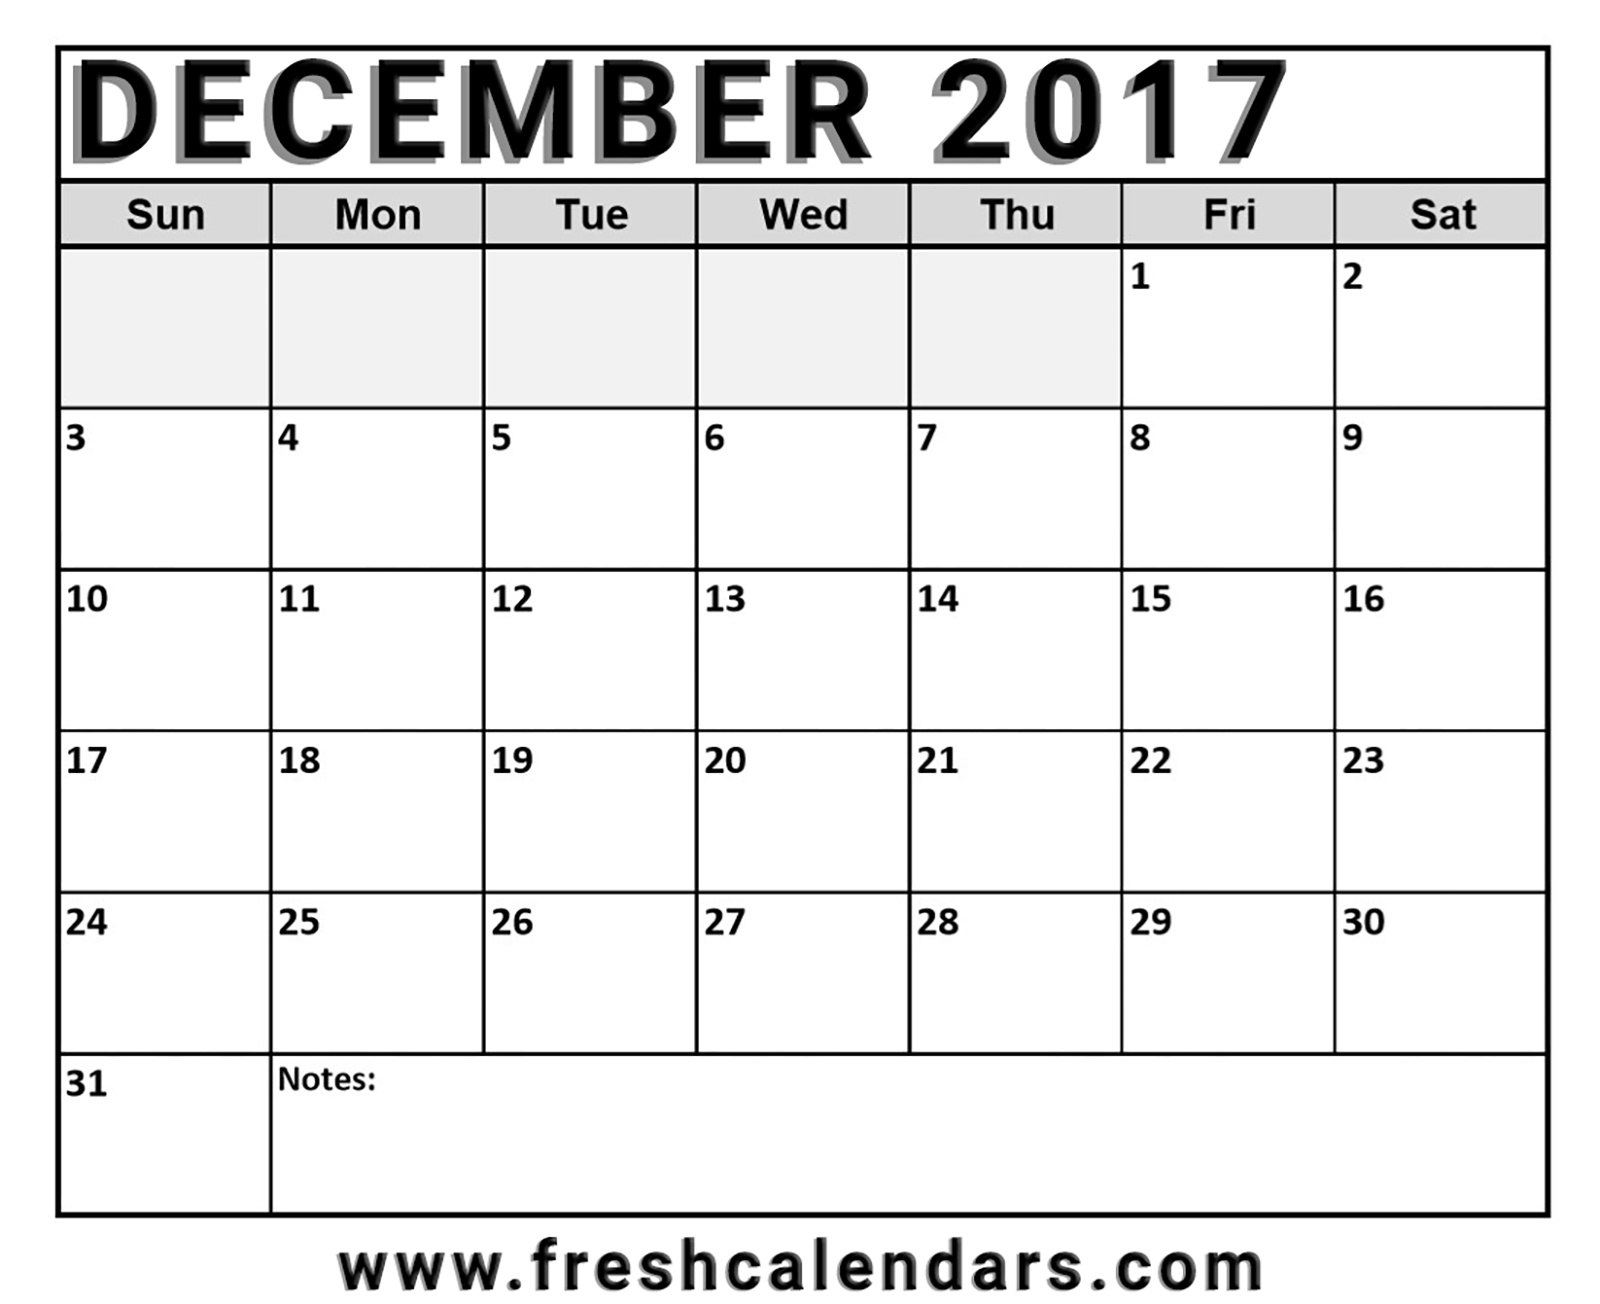 December 2017 Calendar Printable Word Pdf Format With Notes